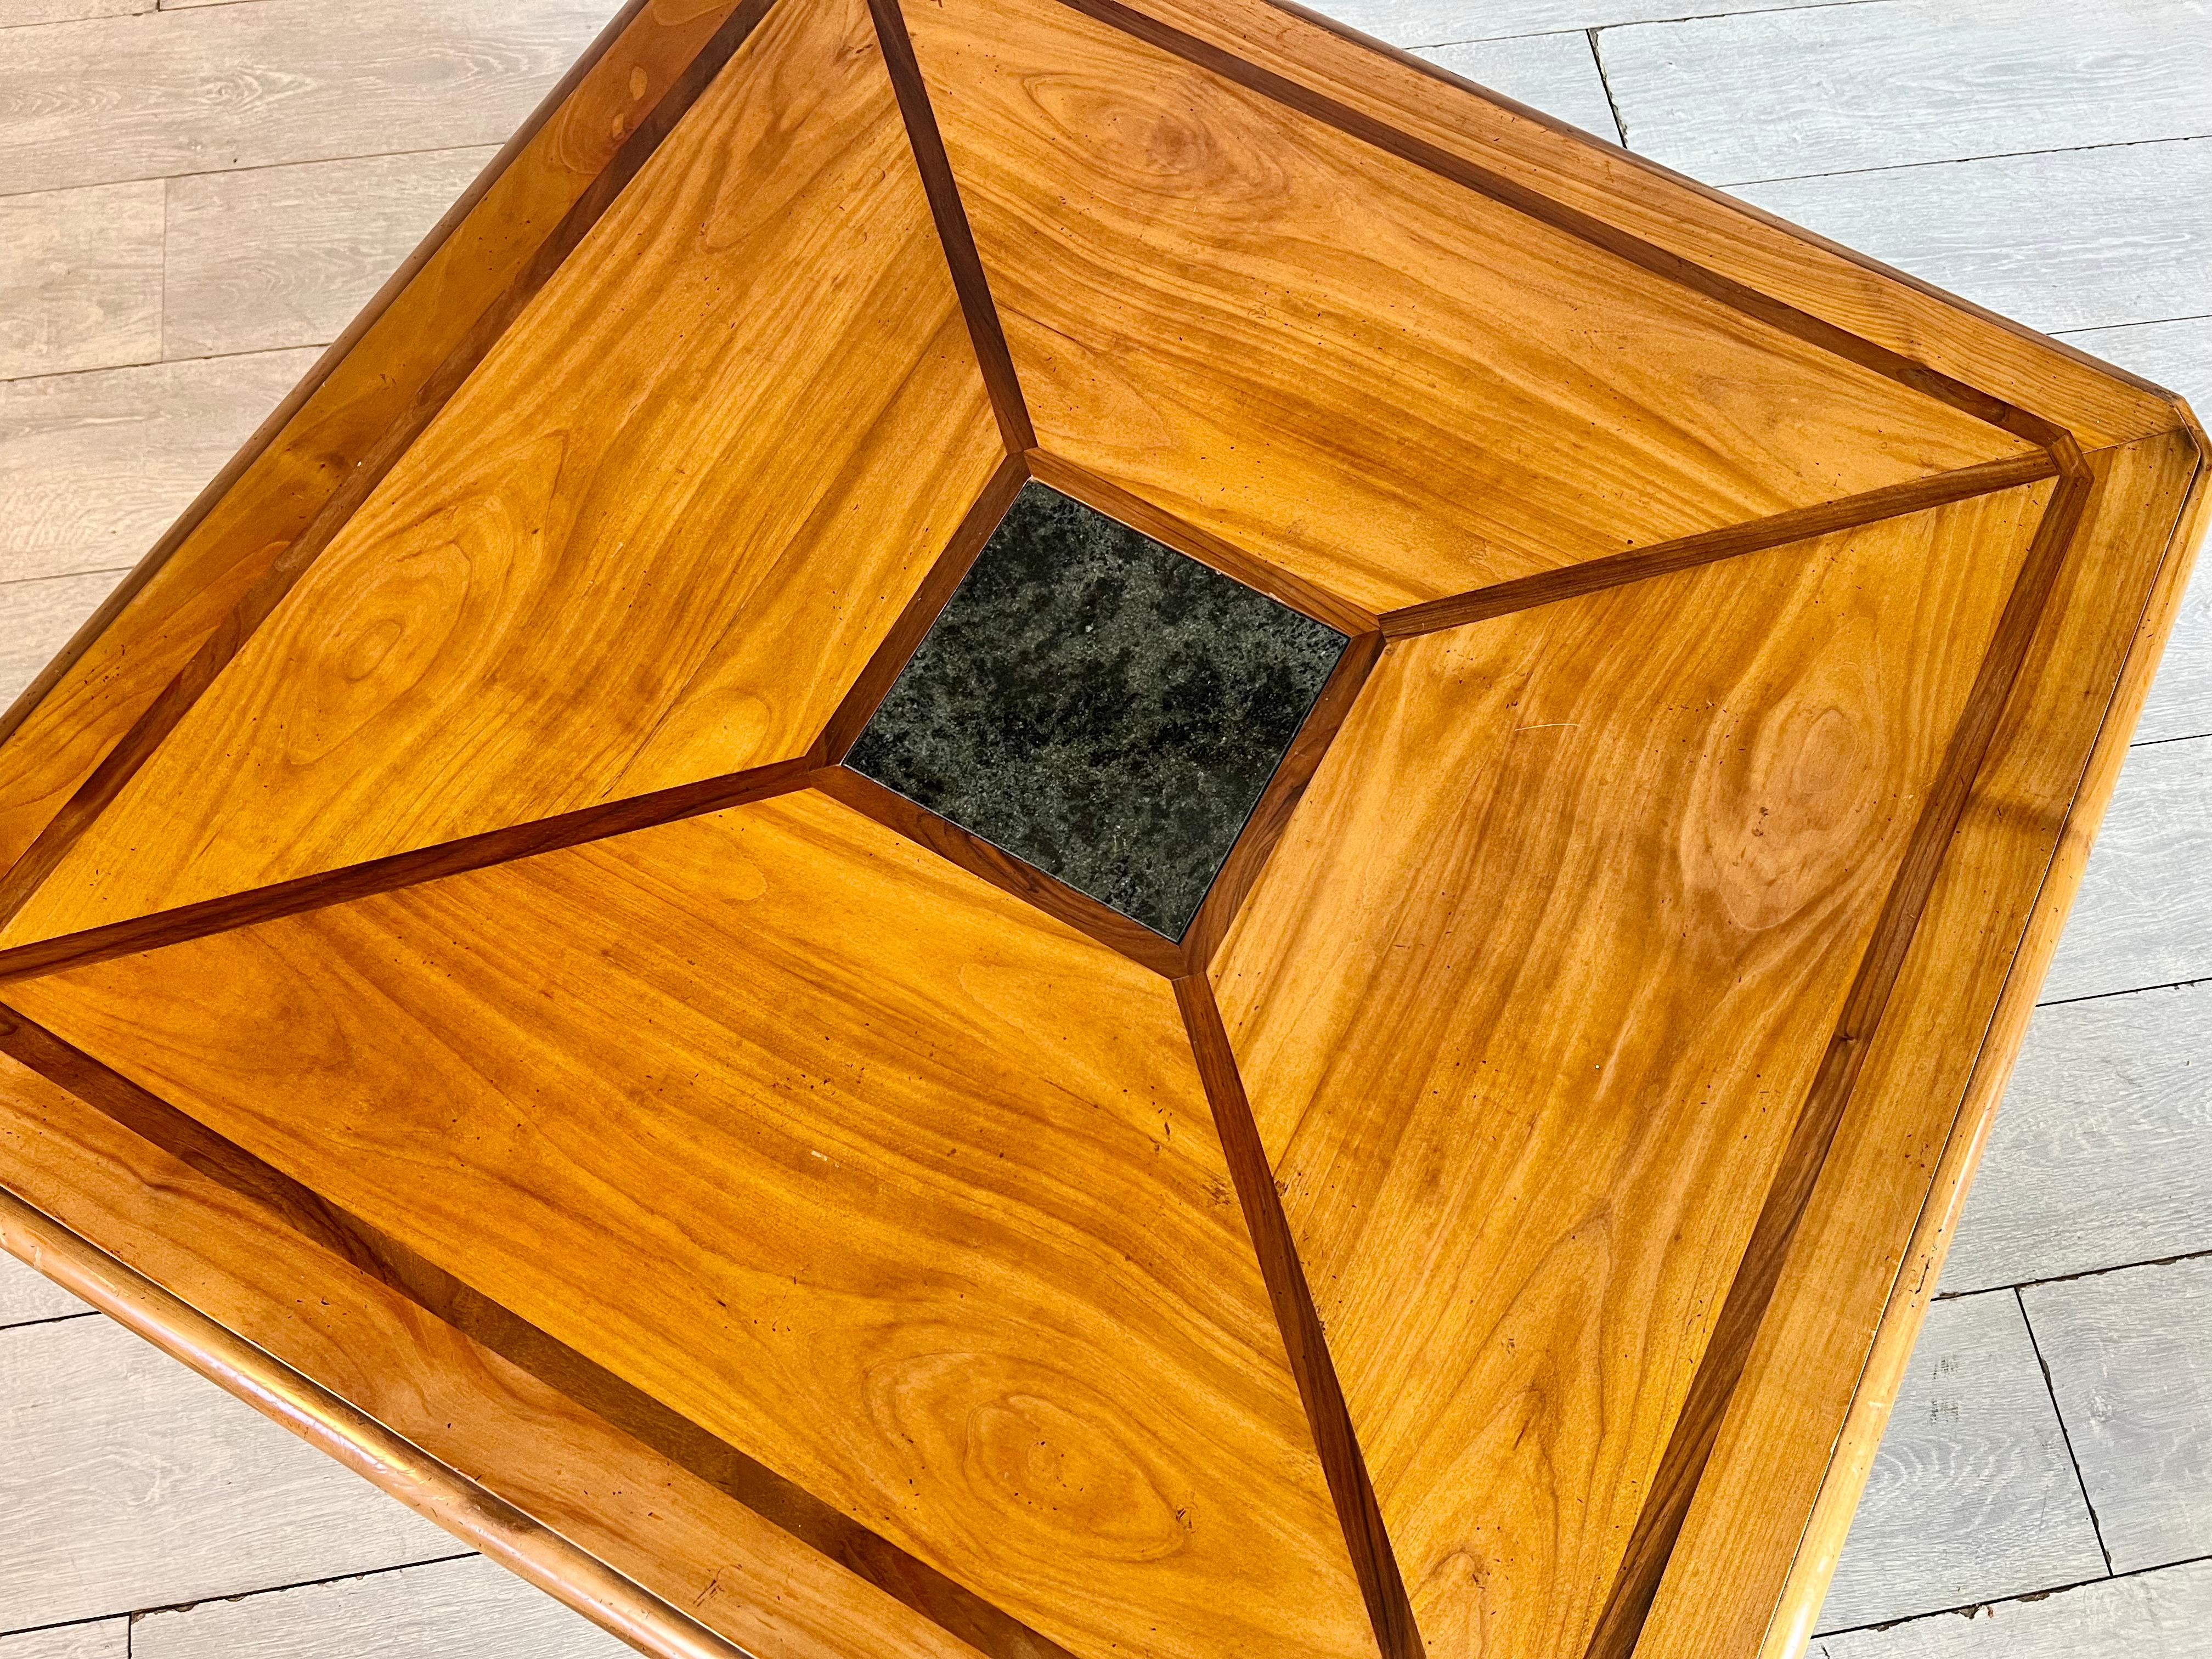 Intricate Swiss Square Coffee Table With Geometric Design and Marble Inlay For Sale 3